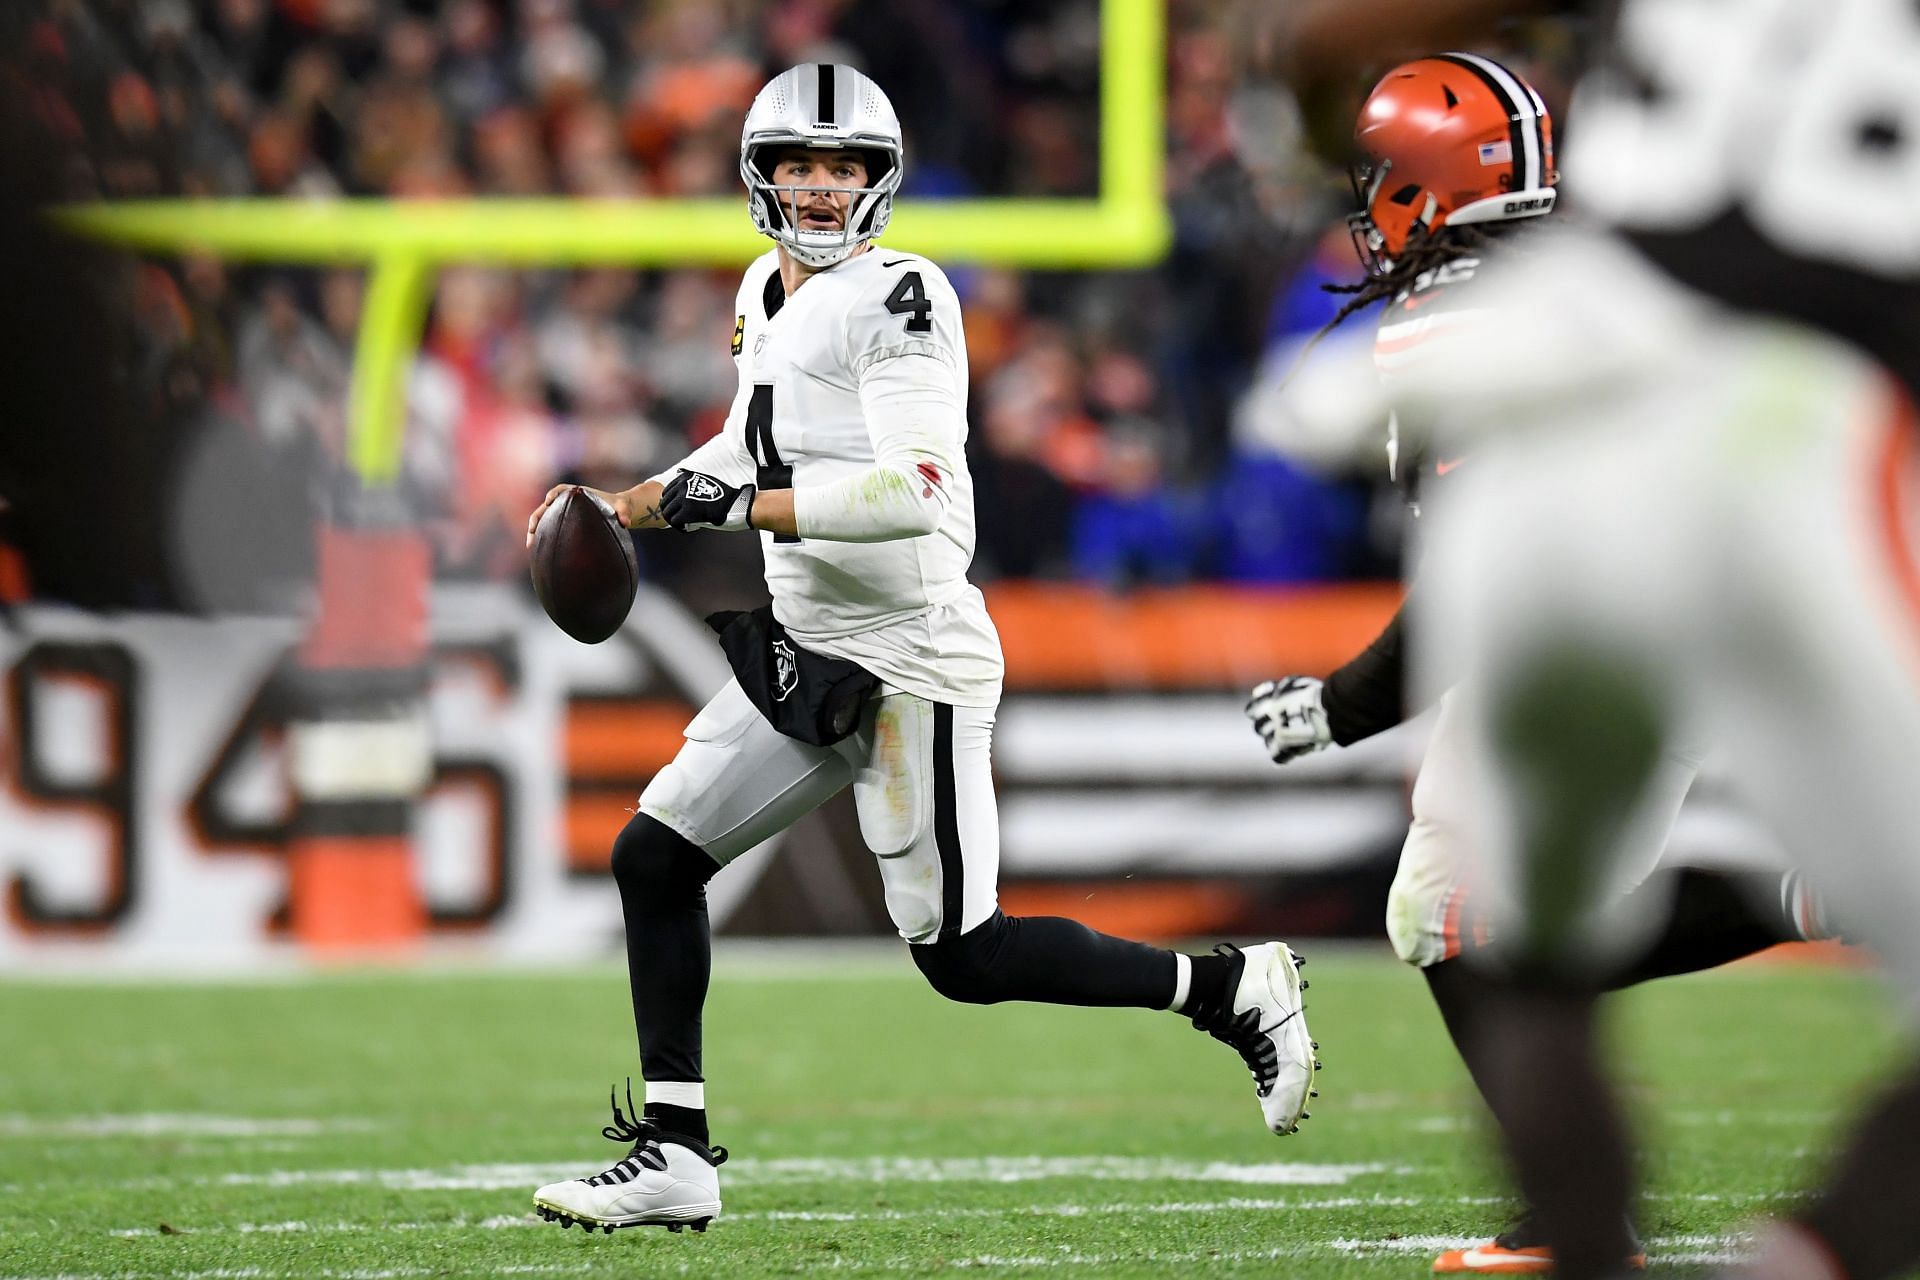 Derek Carr could also be further ahead at this point in his NFL career.